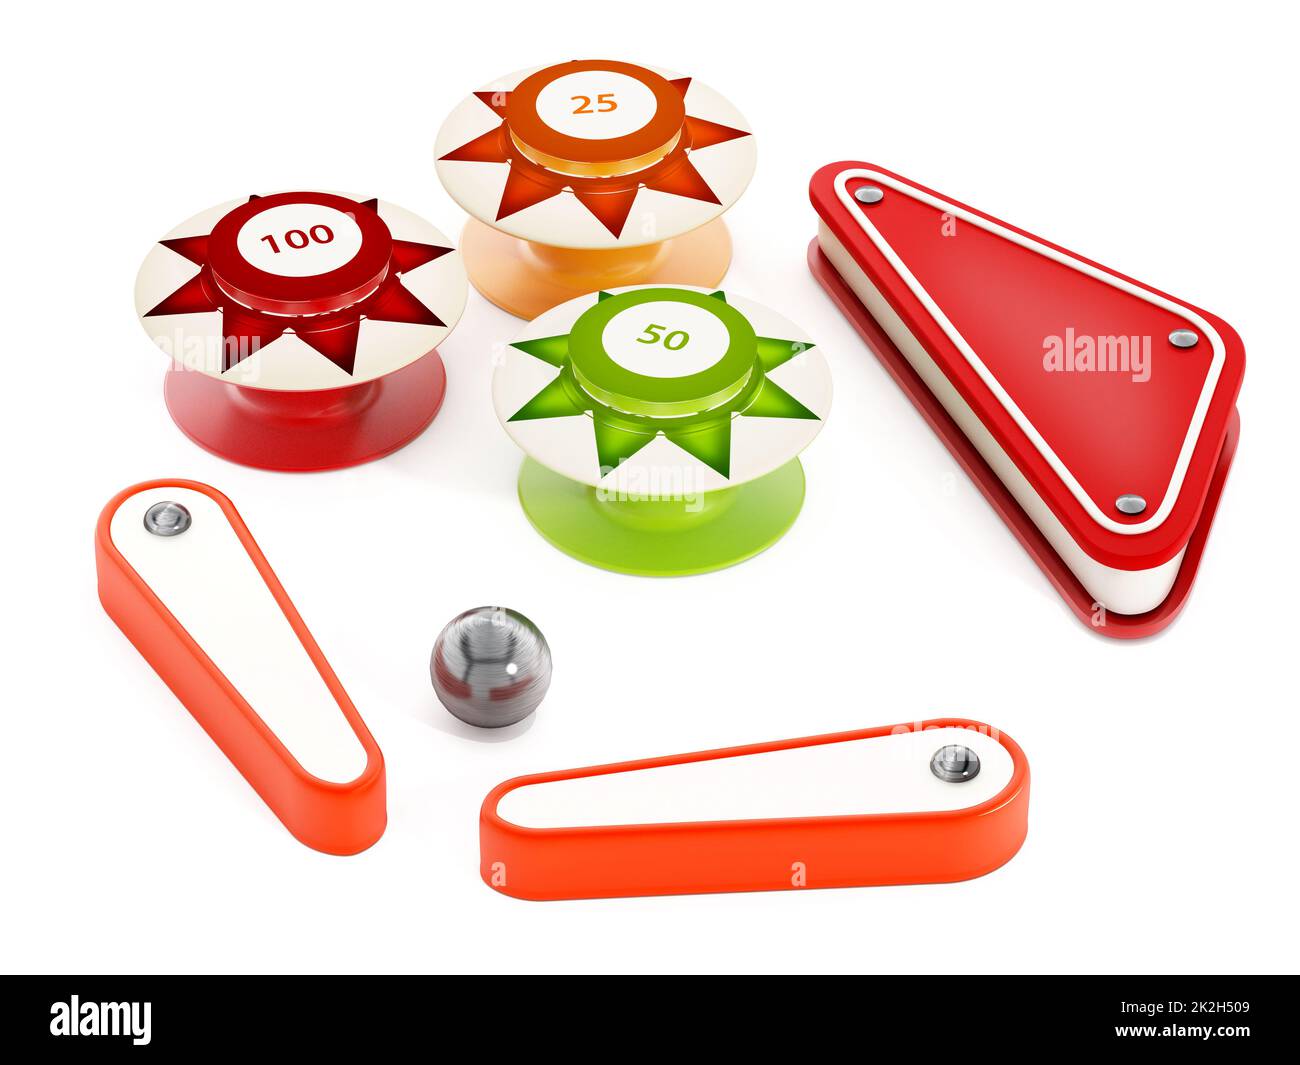 Pinball bumpers, flippers and metal ball on white background. 3D illustration Stock Photo